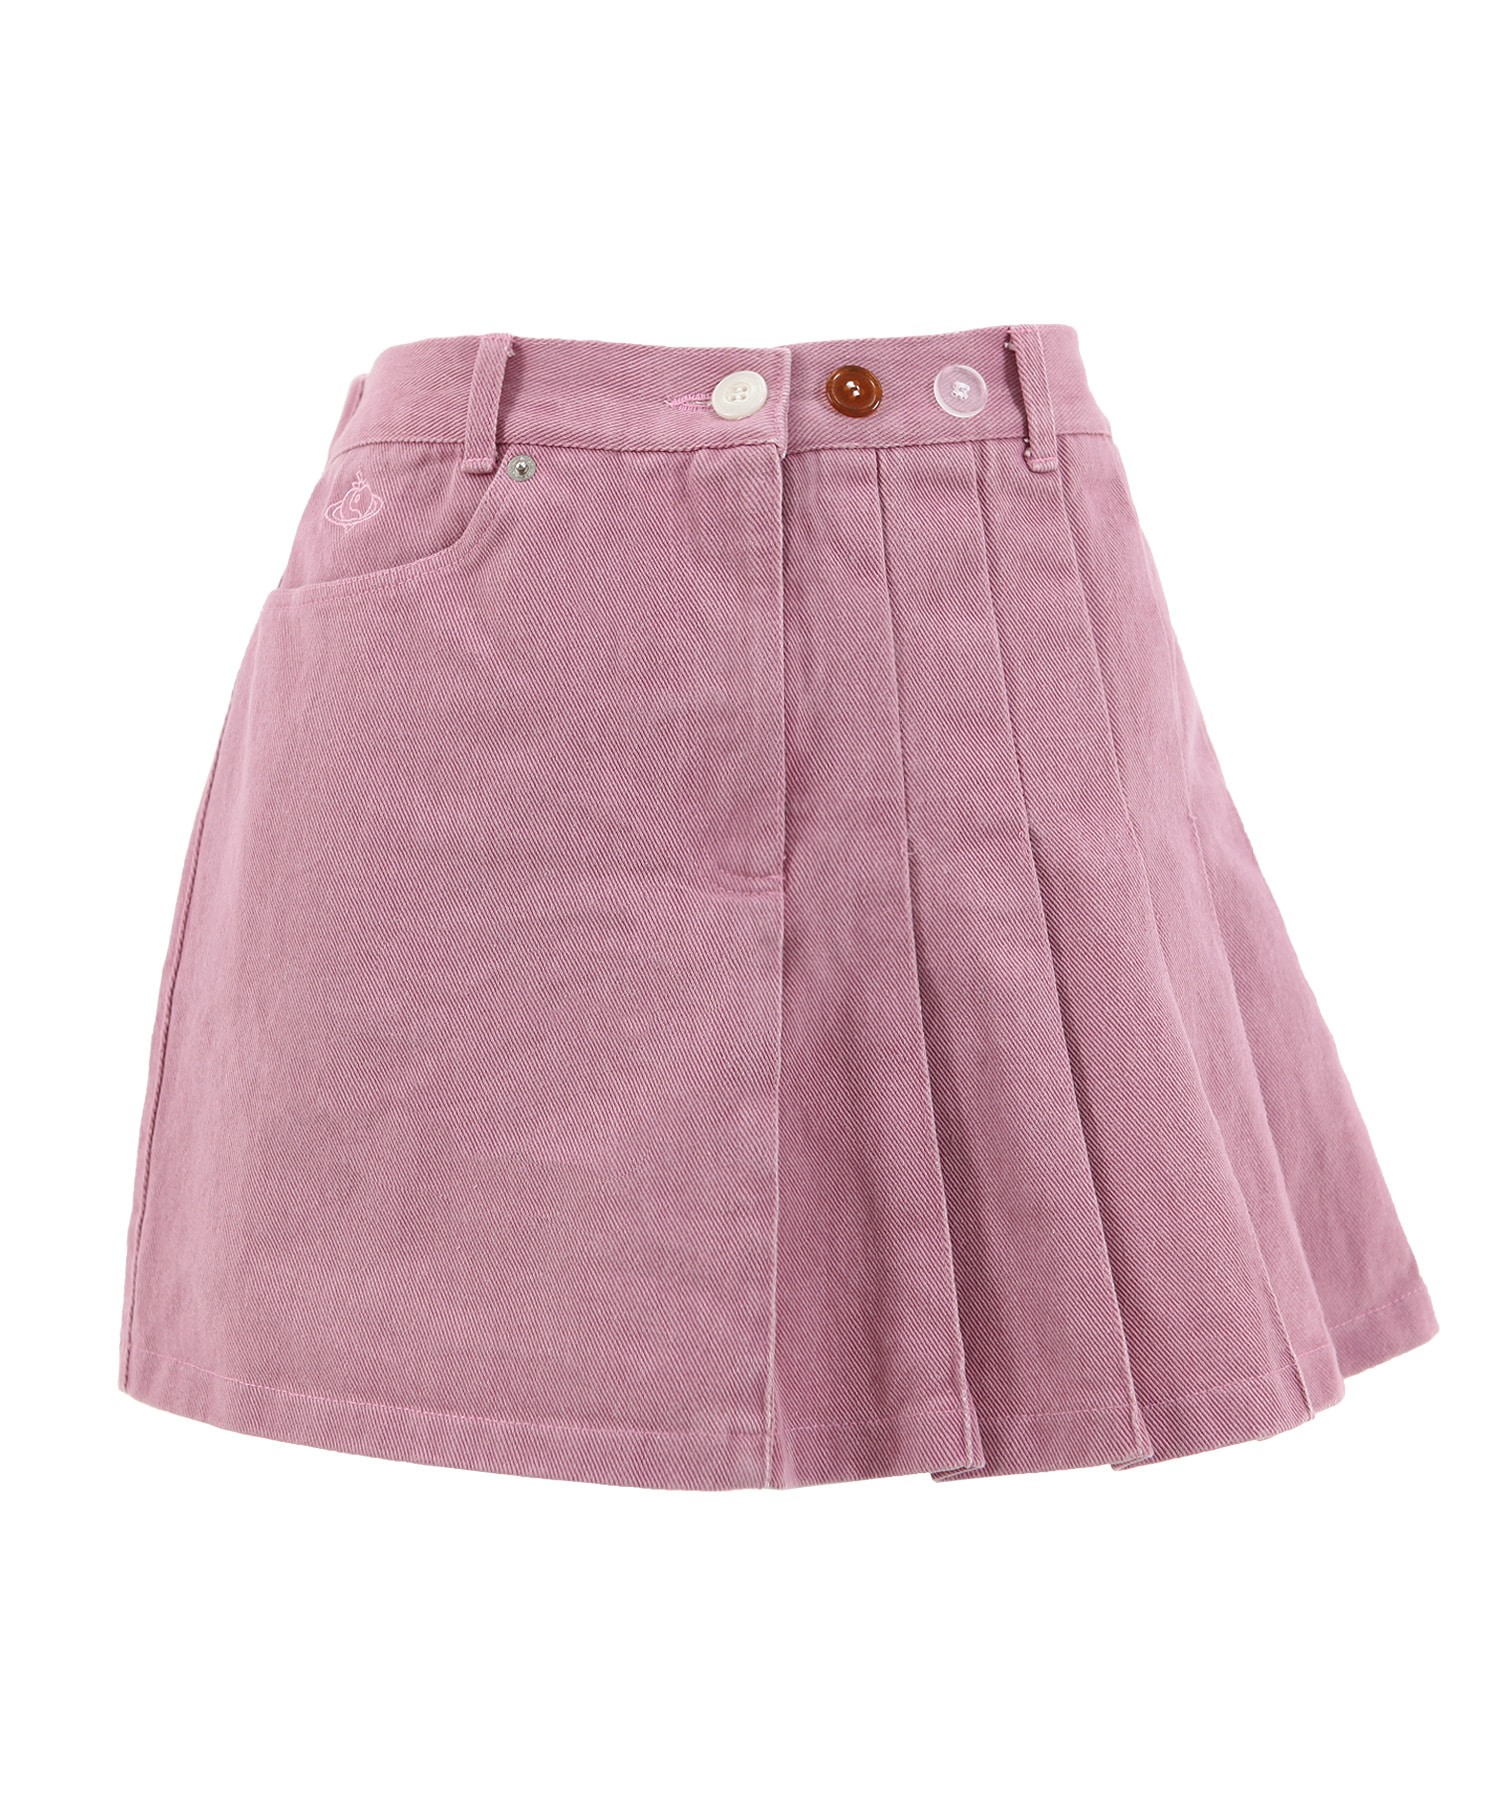 CHARMING SKIRT IN PINK